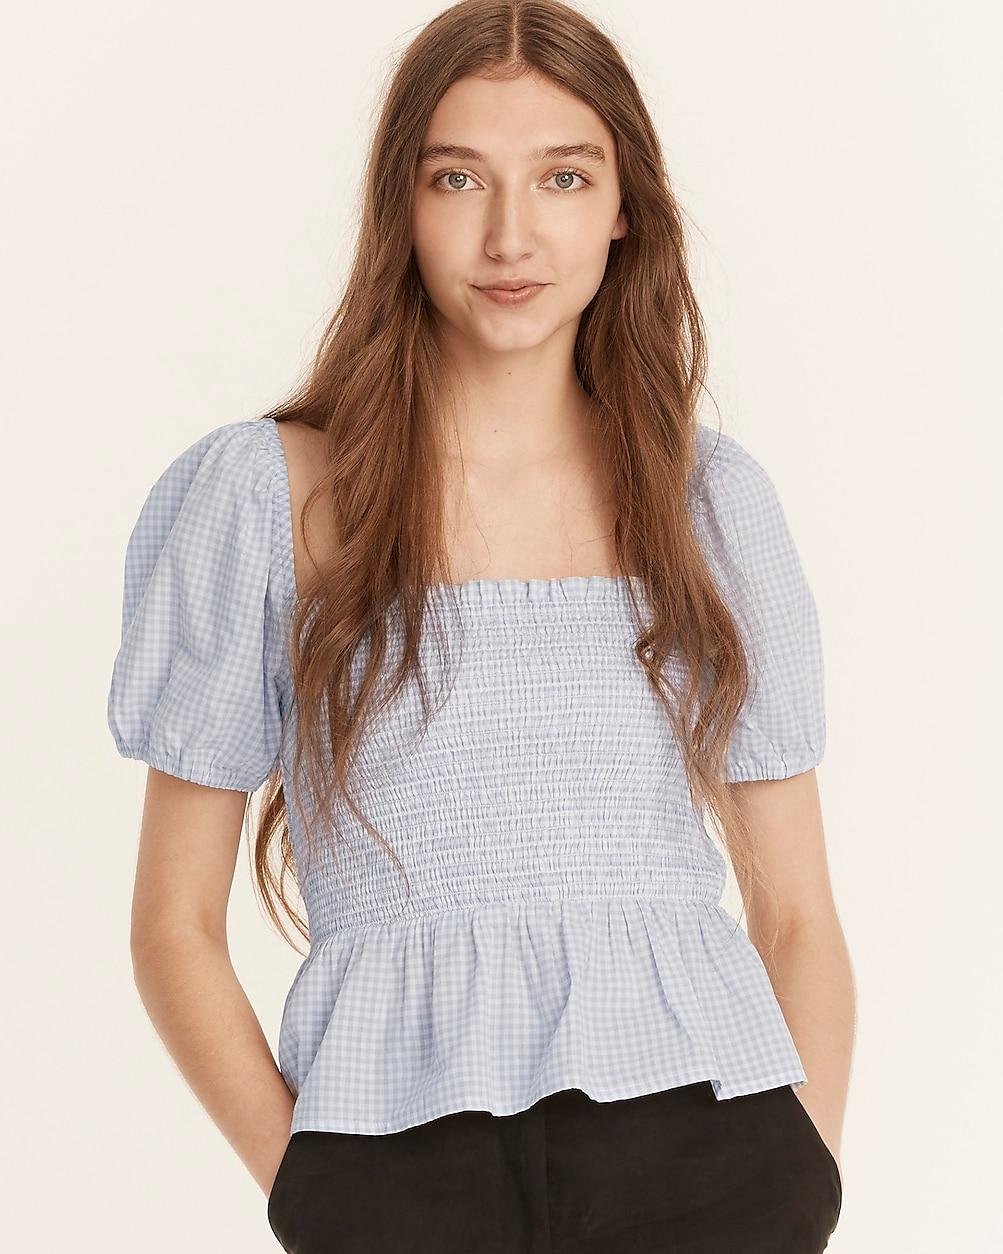 Squareneck smocked cotton voile top in gingham by J.CREW